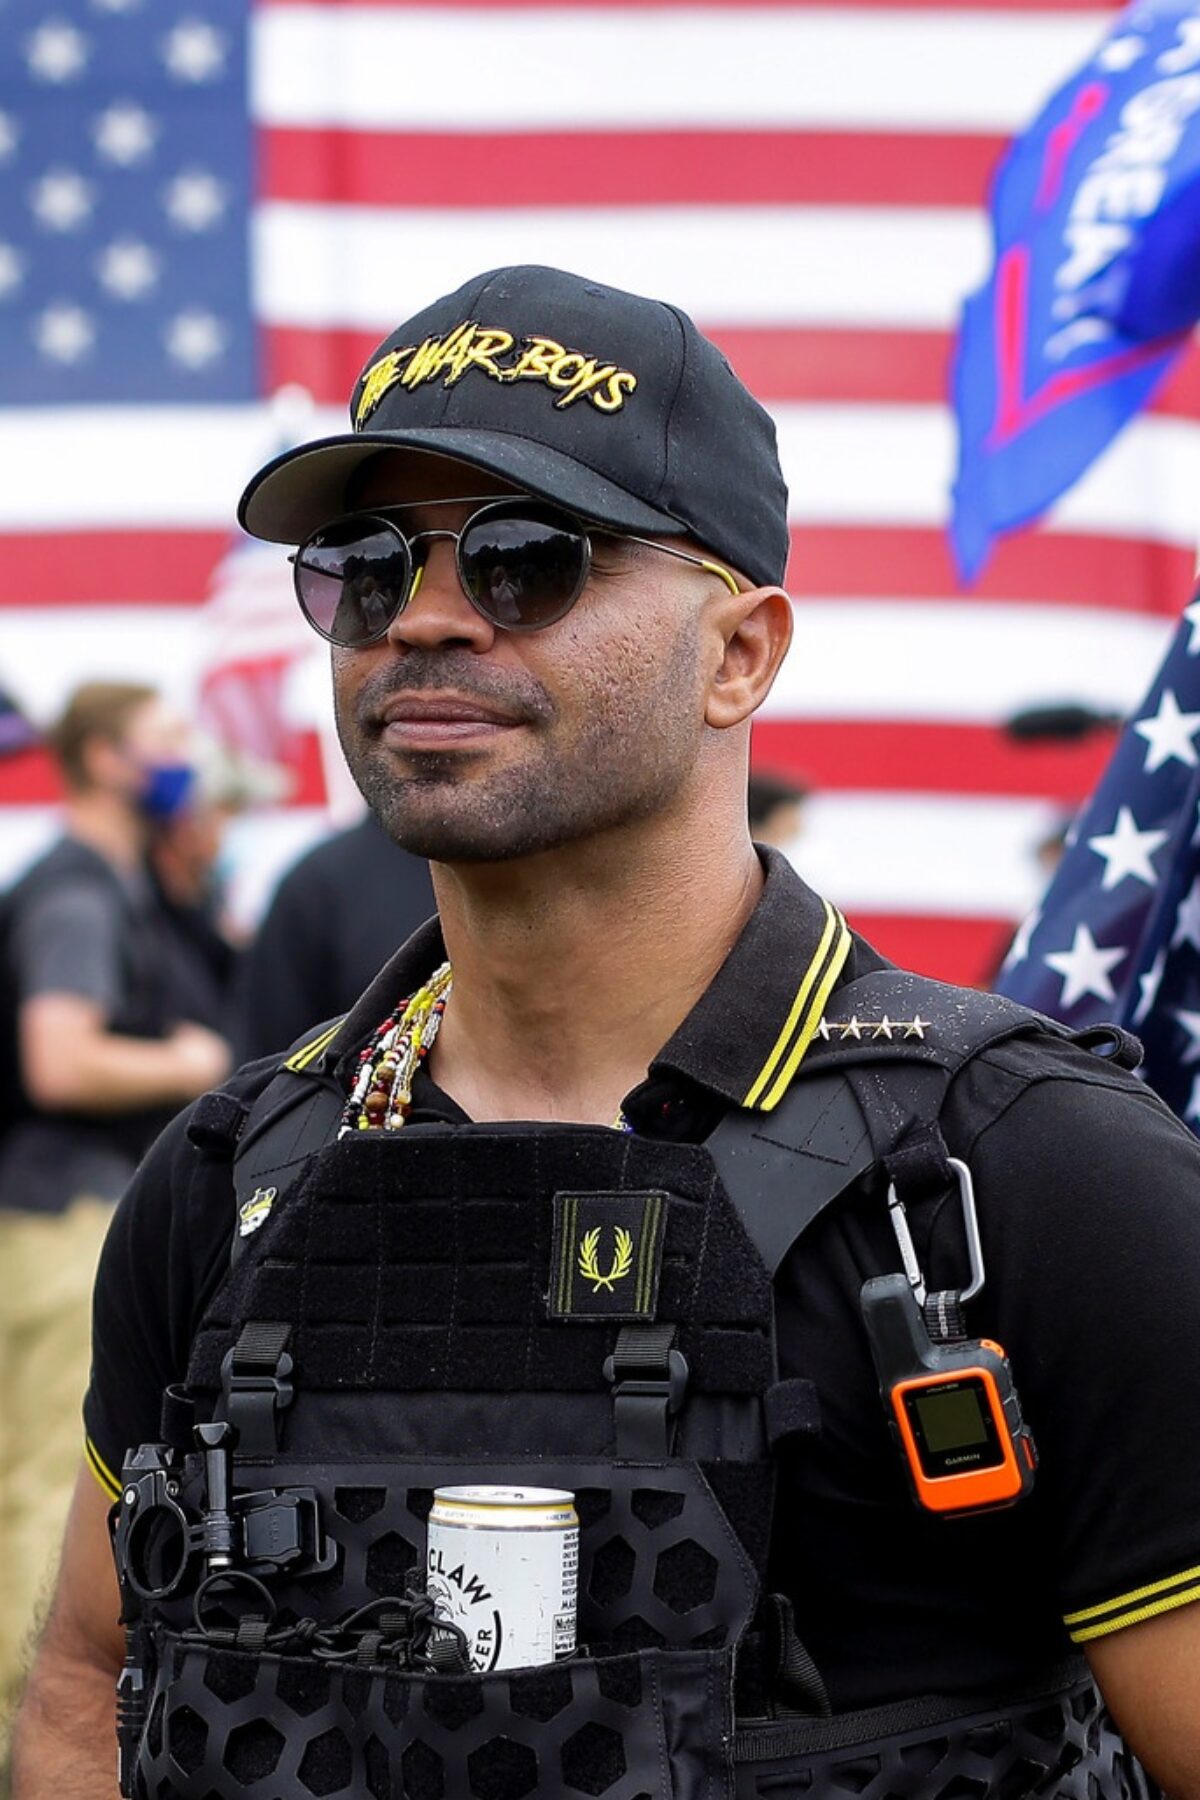 PORTLAND, OR - SEPTEMBER 26: Proud Boys chairman Enrique Tarrio (C) poses for a portrait at Delta Park during a rally on September 26, 2020 in Portland, Oregon. Hundreds of right-leaning activists attended Saturday's event. (Photo by Joshua Lott/The Washington Post via Getty Images)